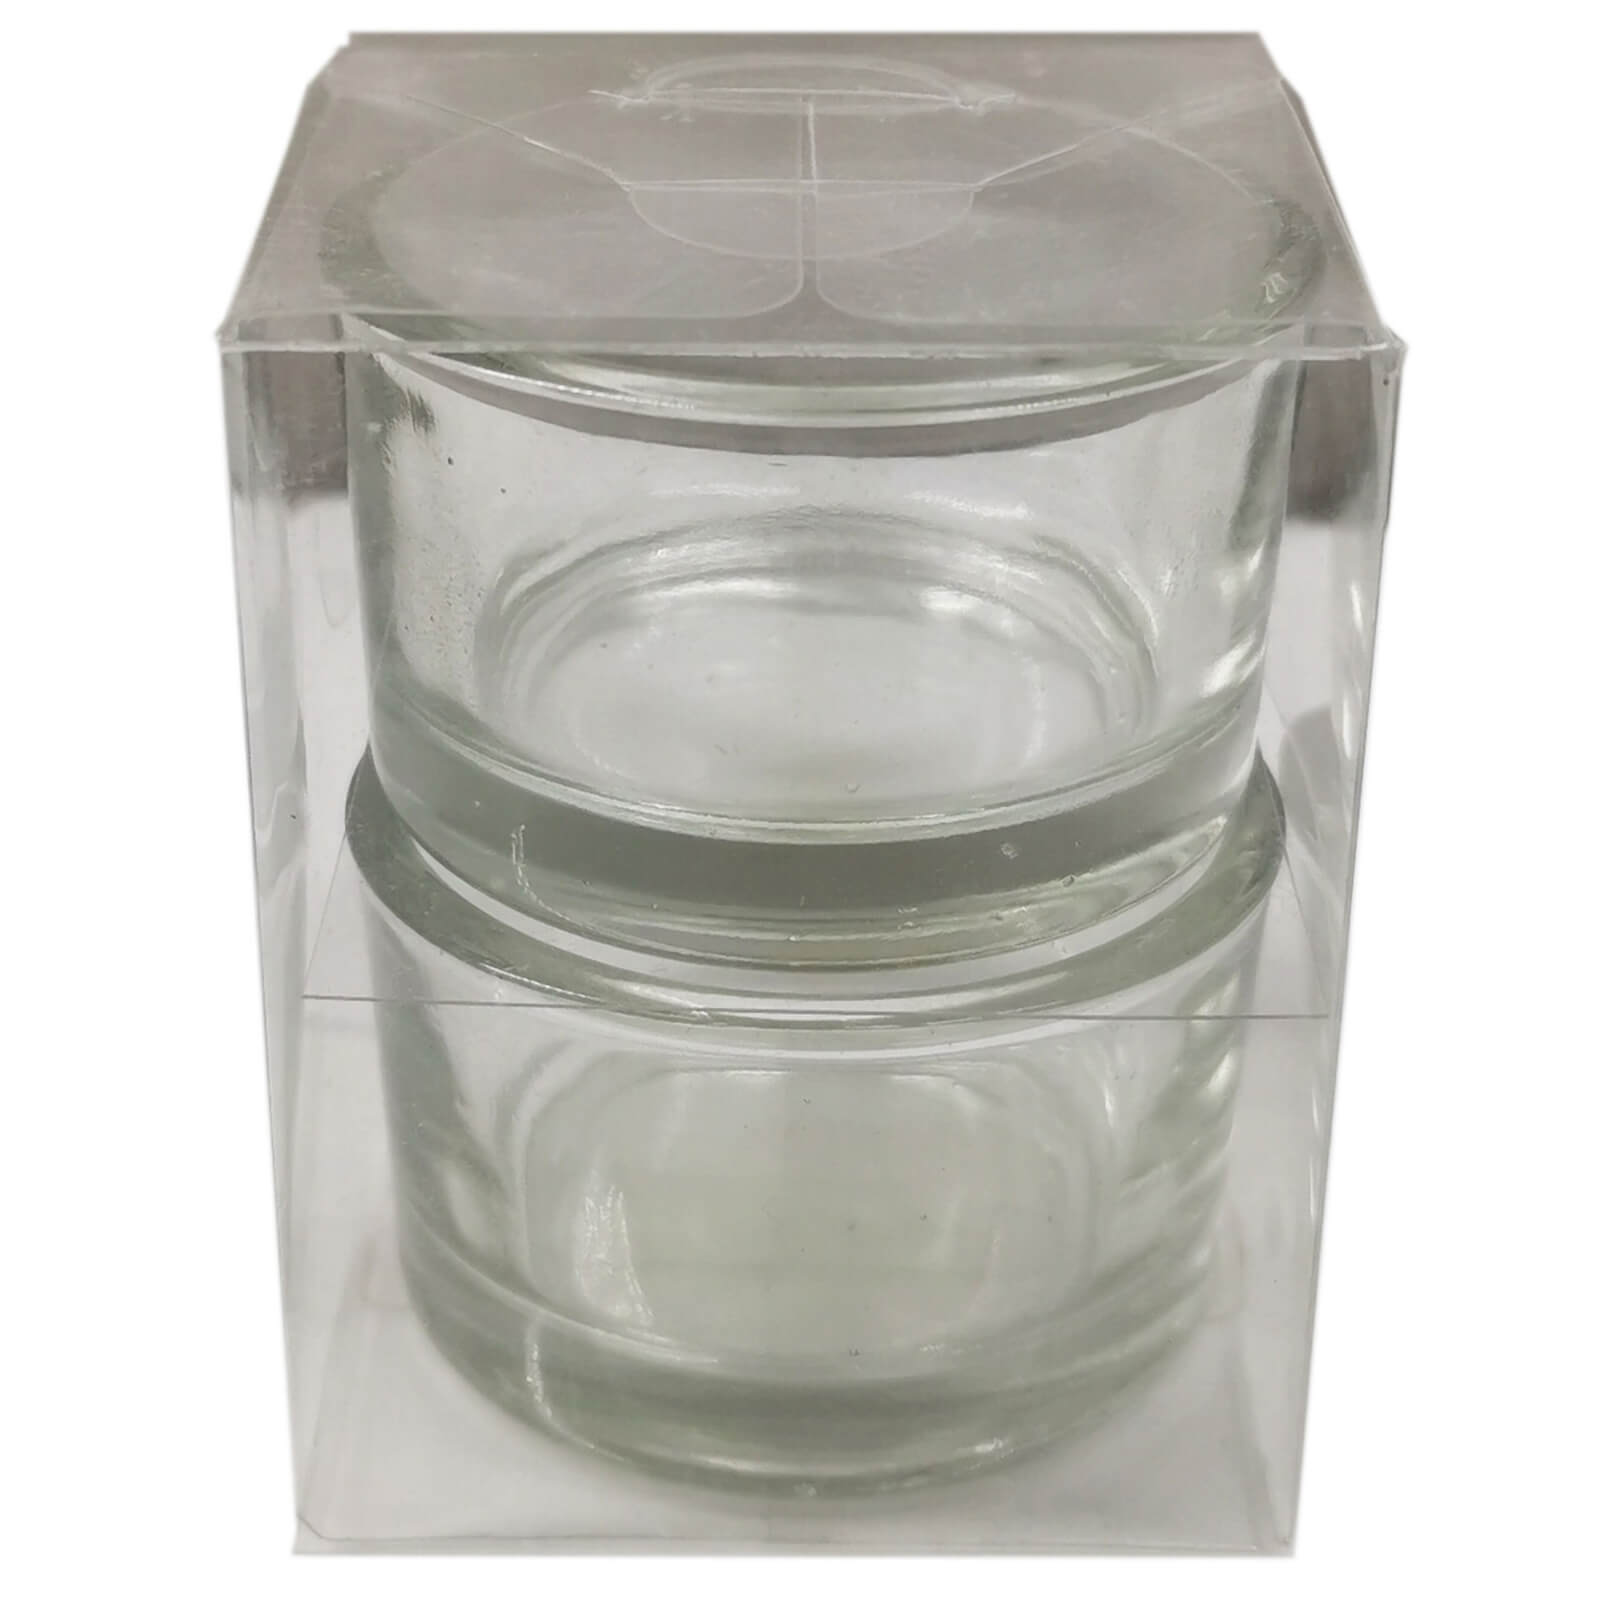 Photo of Clear Tealight Candle Holders - 2 Pack